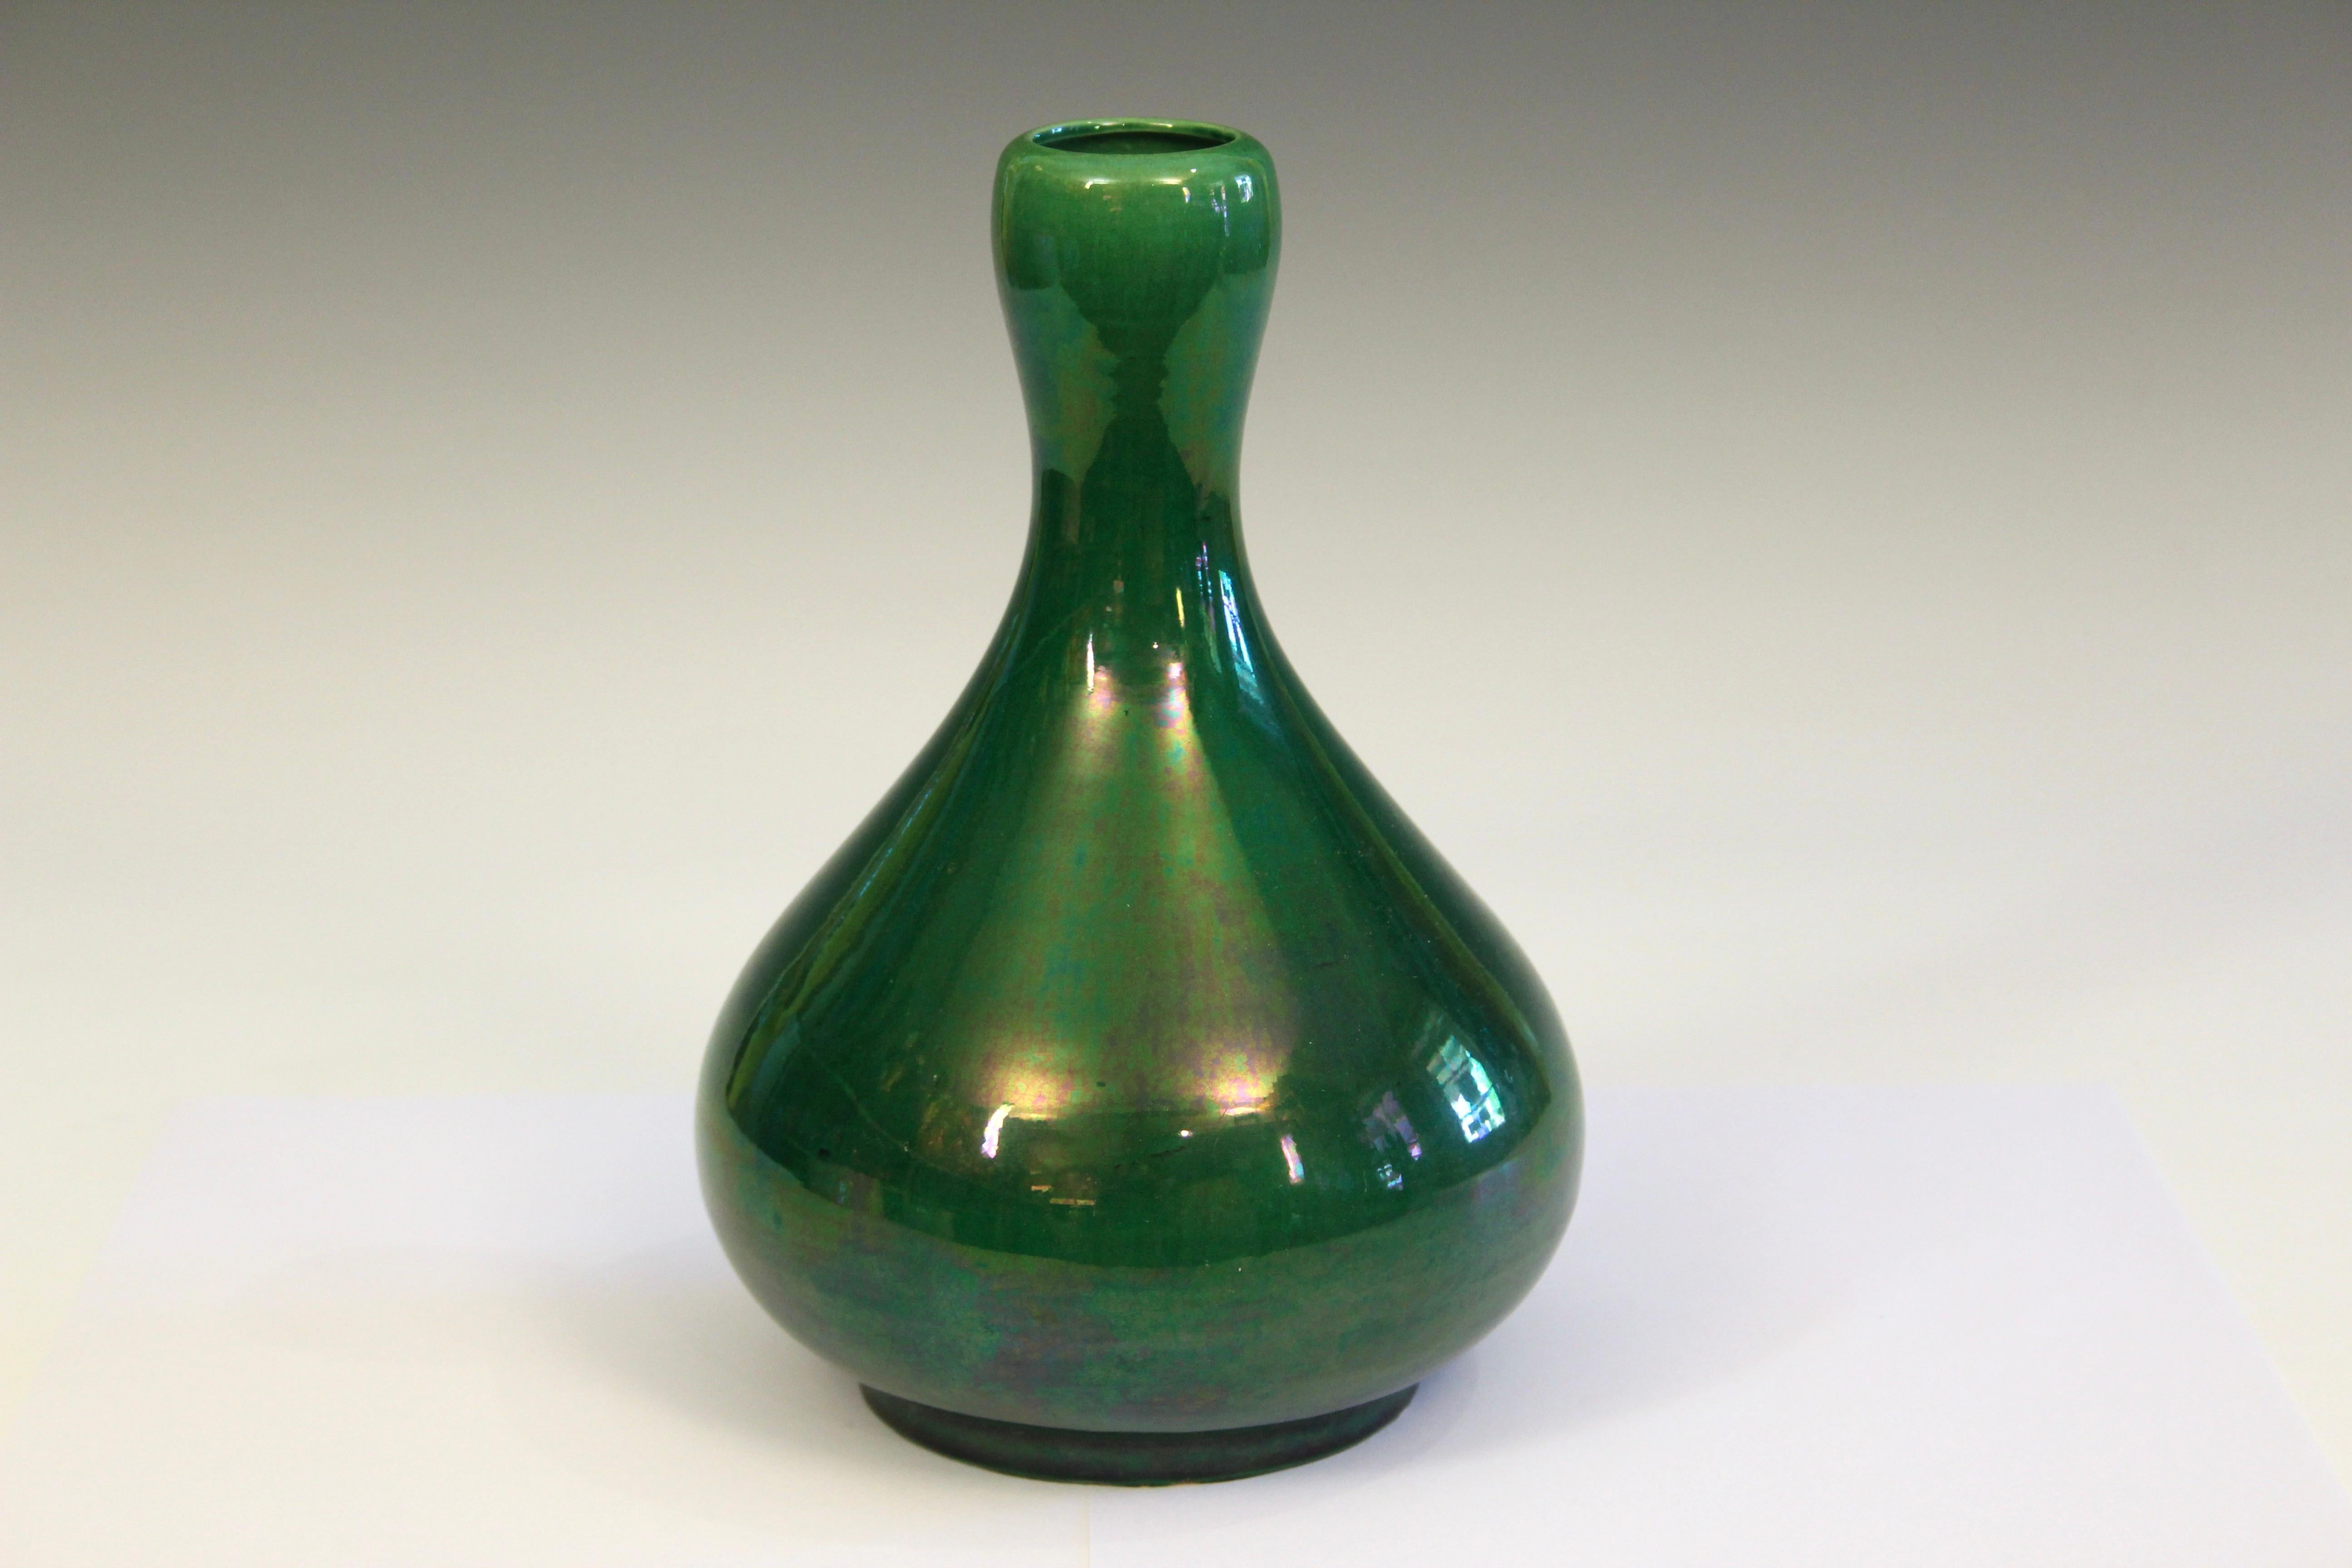 Antique Awaji pottery vase in organic gourd form with great emerald green monochrome glaze, circa 1920. Measures: 9